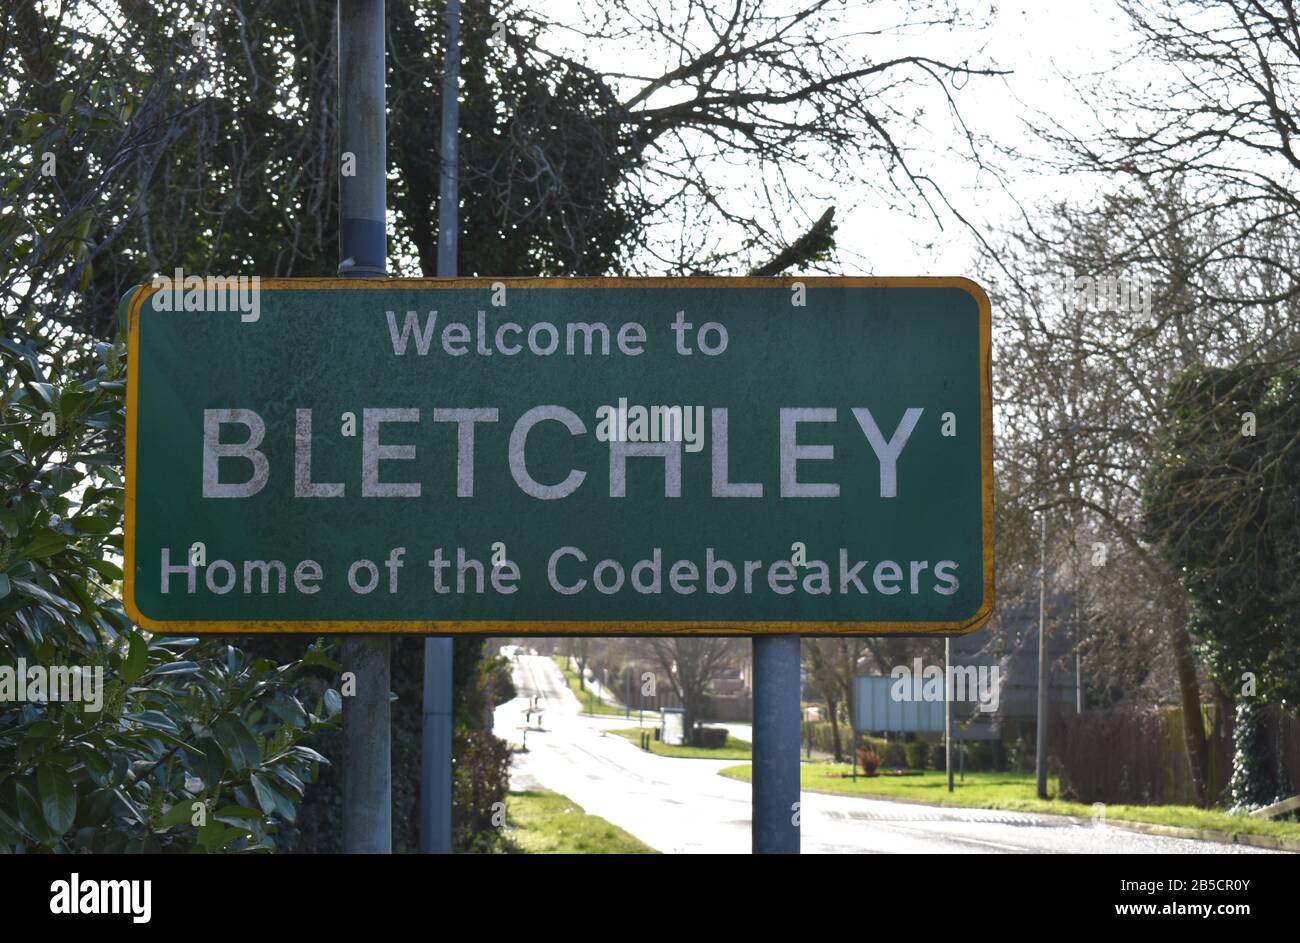 Roadsign 'Welcome to Bletchley - Home of the Codebreakers'.  This refers to Bletchley Park, once the top-secret home of the World War II codebreakers. Stock Photo